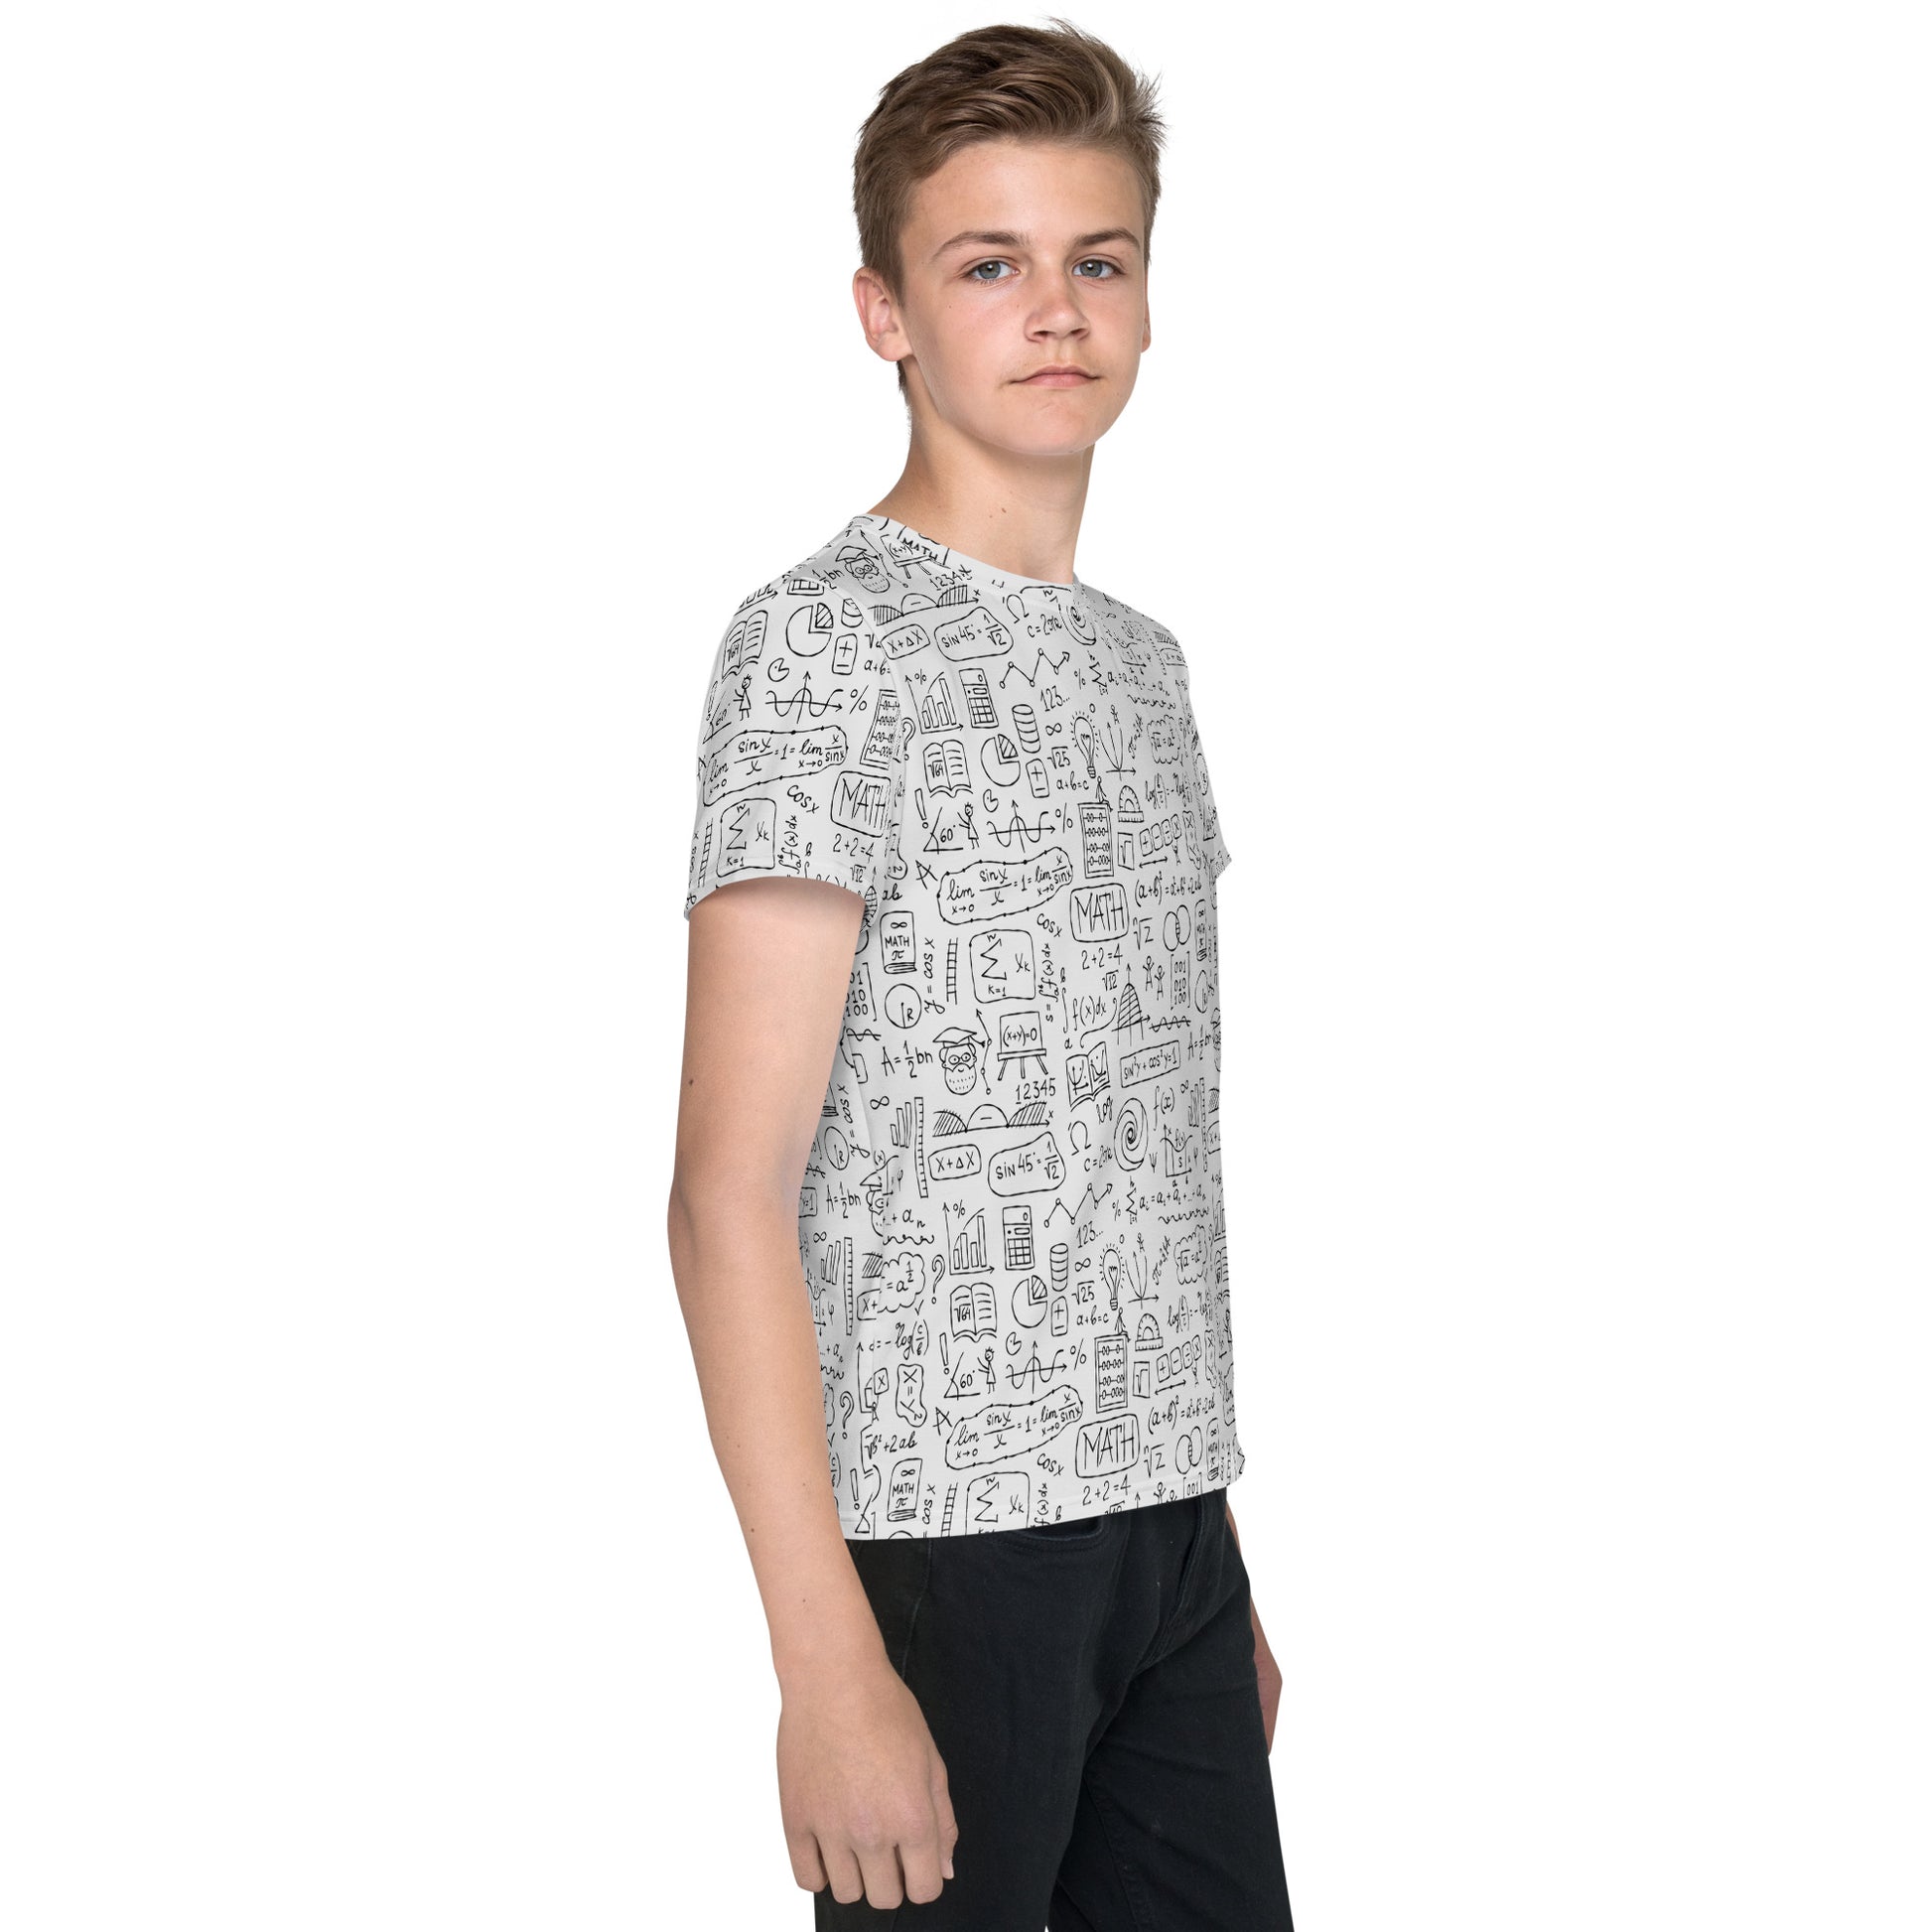 Boy wearing t-shirt light grey color with all-over math print featuring algebra and calculus symbols and equations